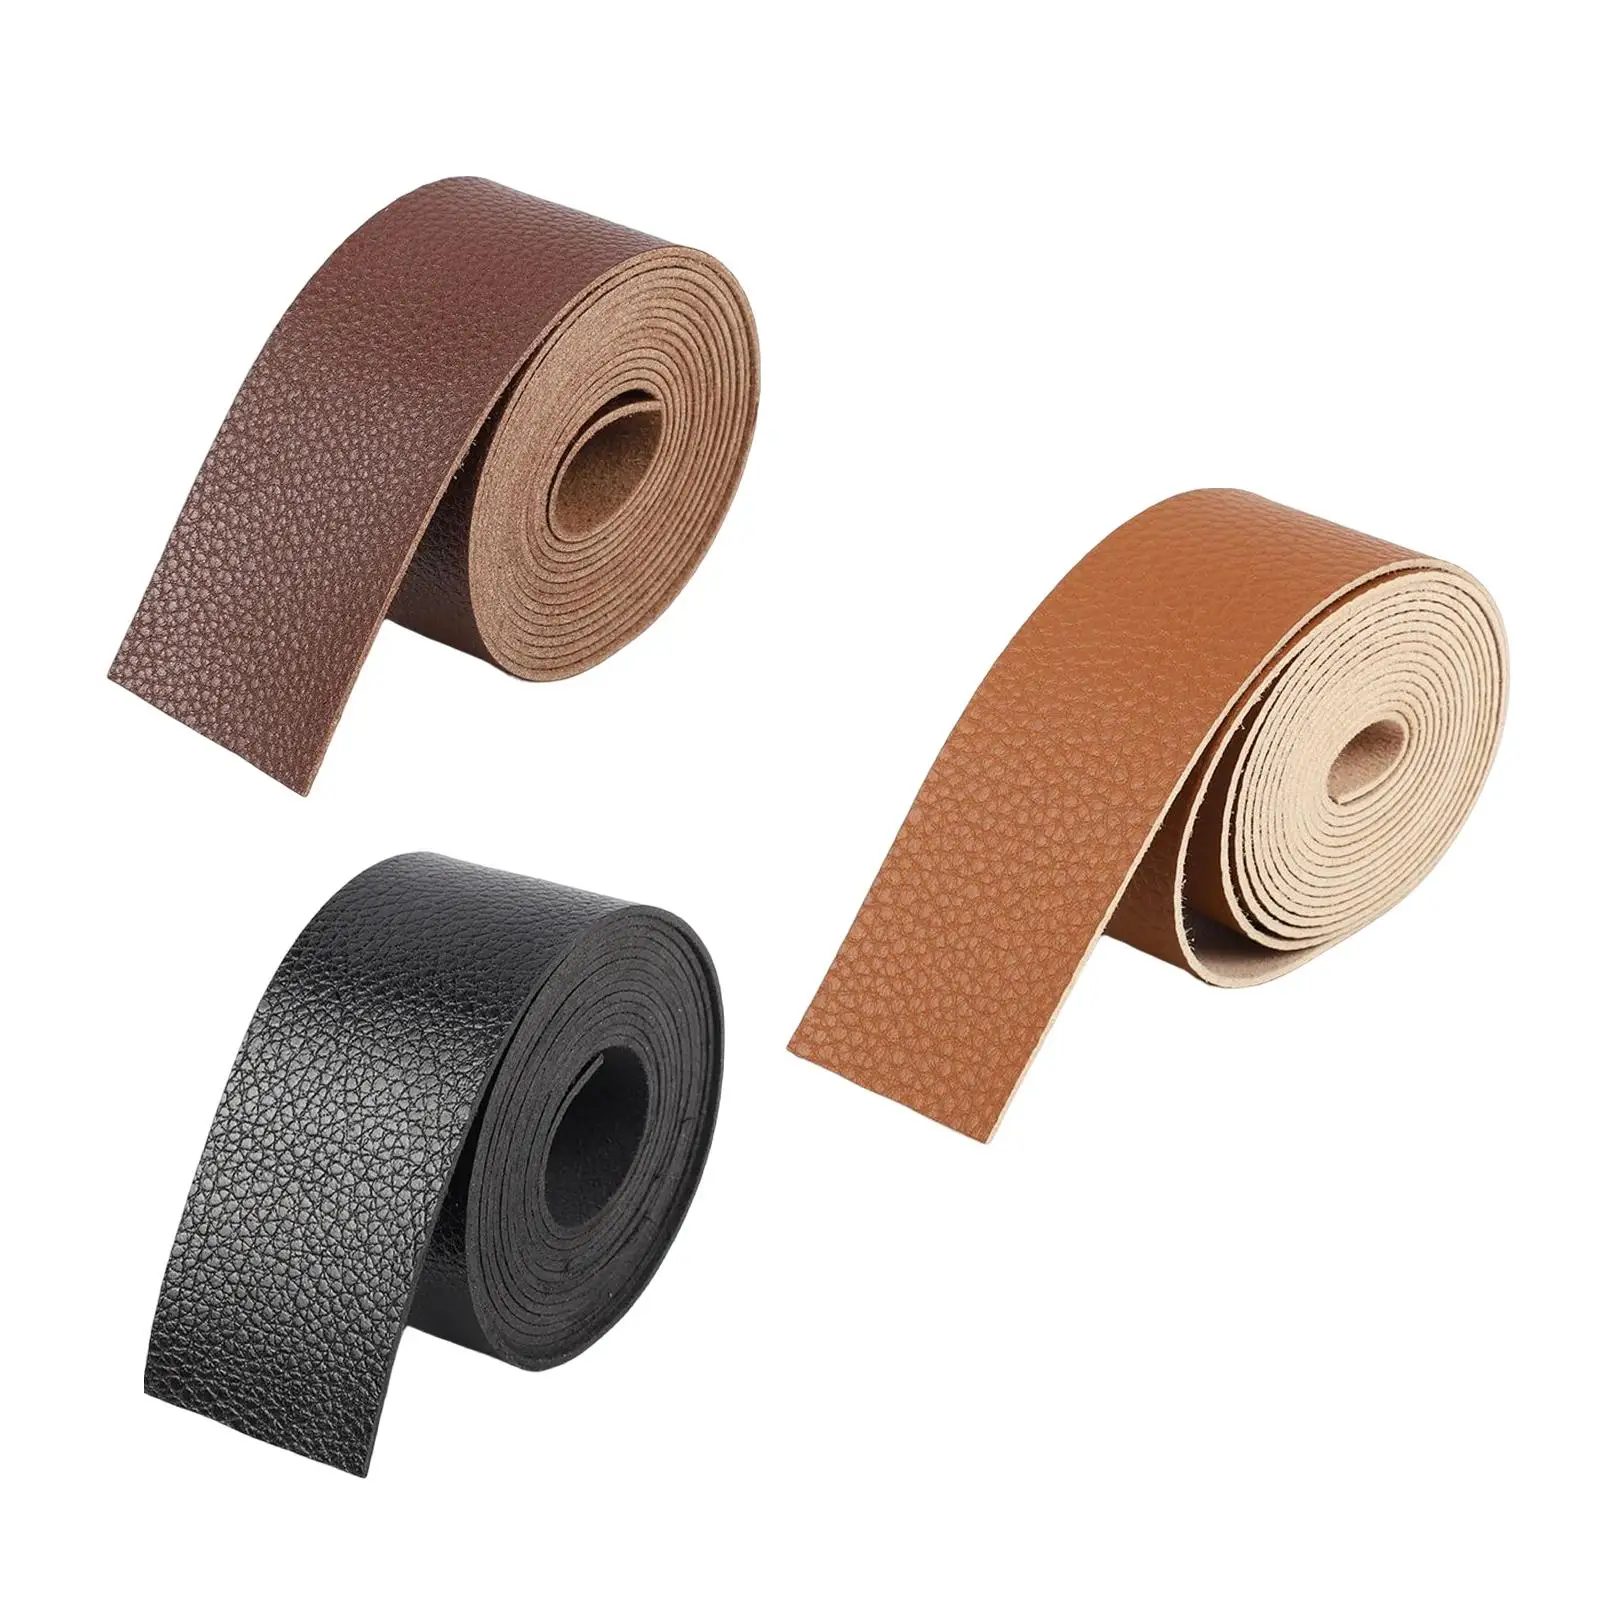 Faux Leather Strap Strips Art Decorative Supplies DIY Belt Band for Clothing